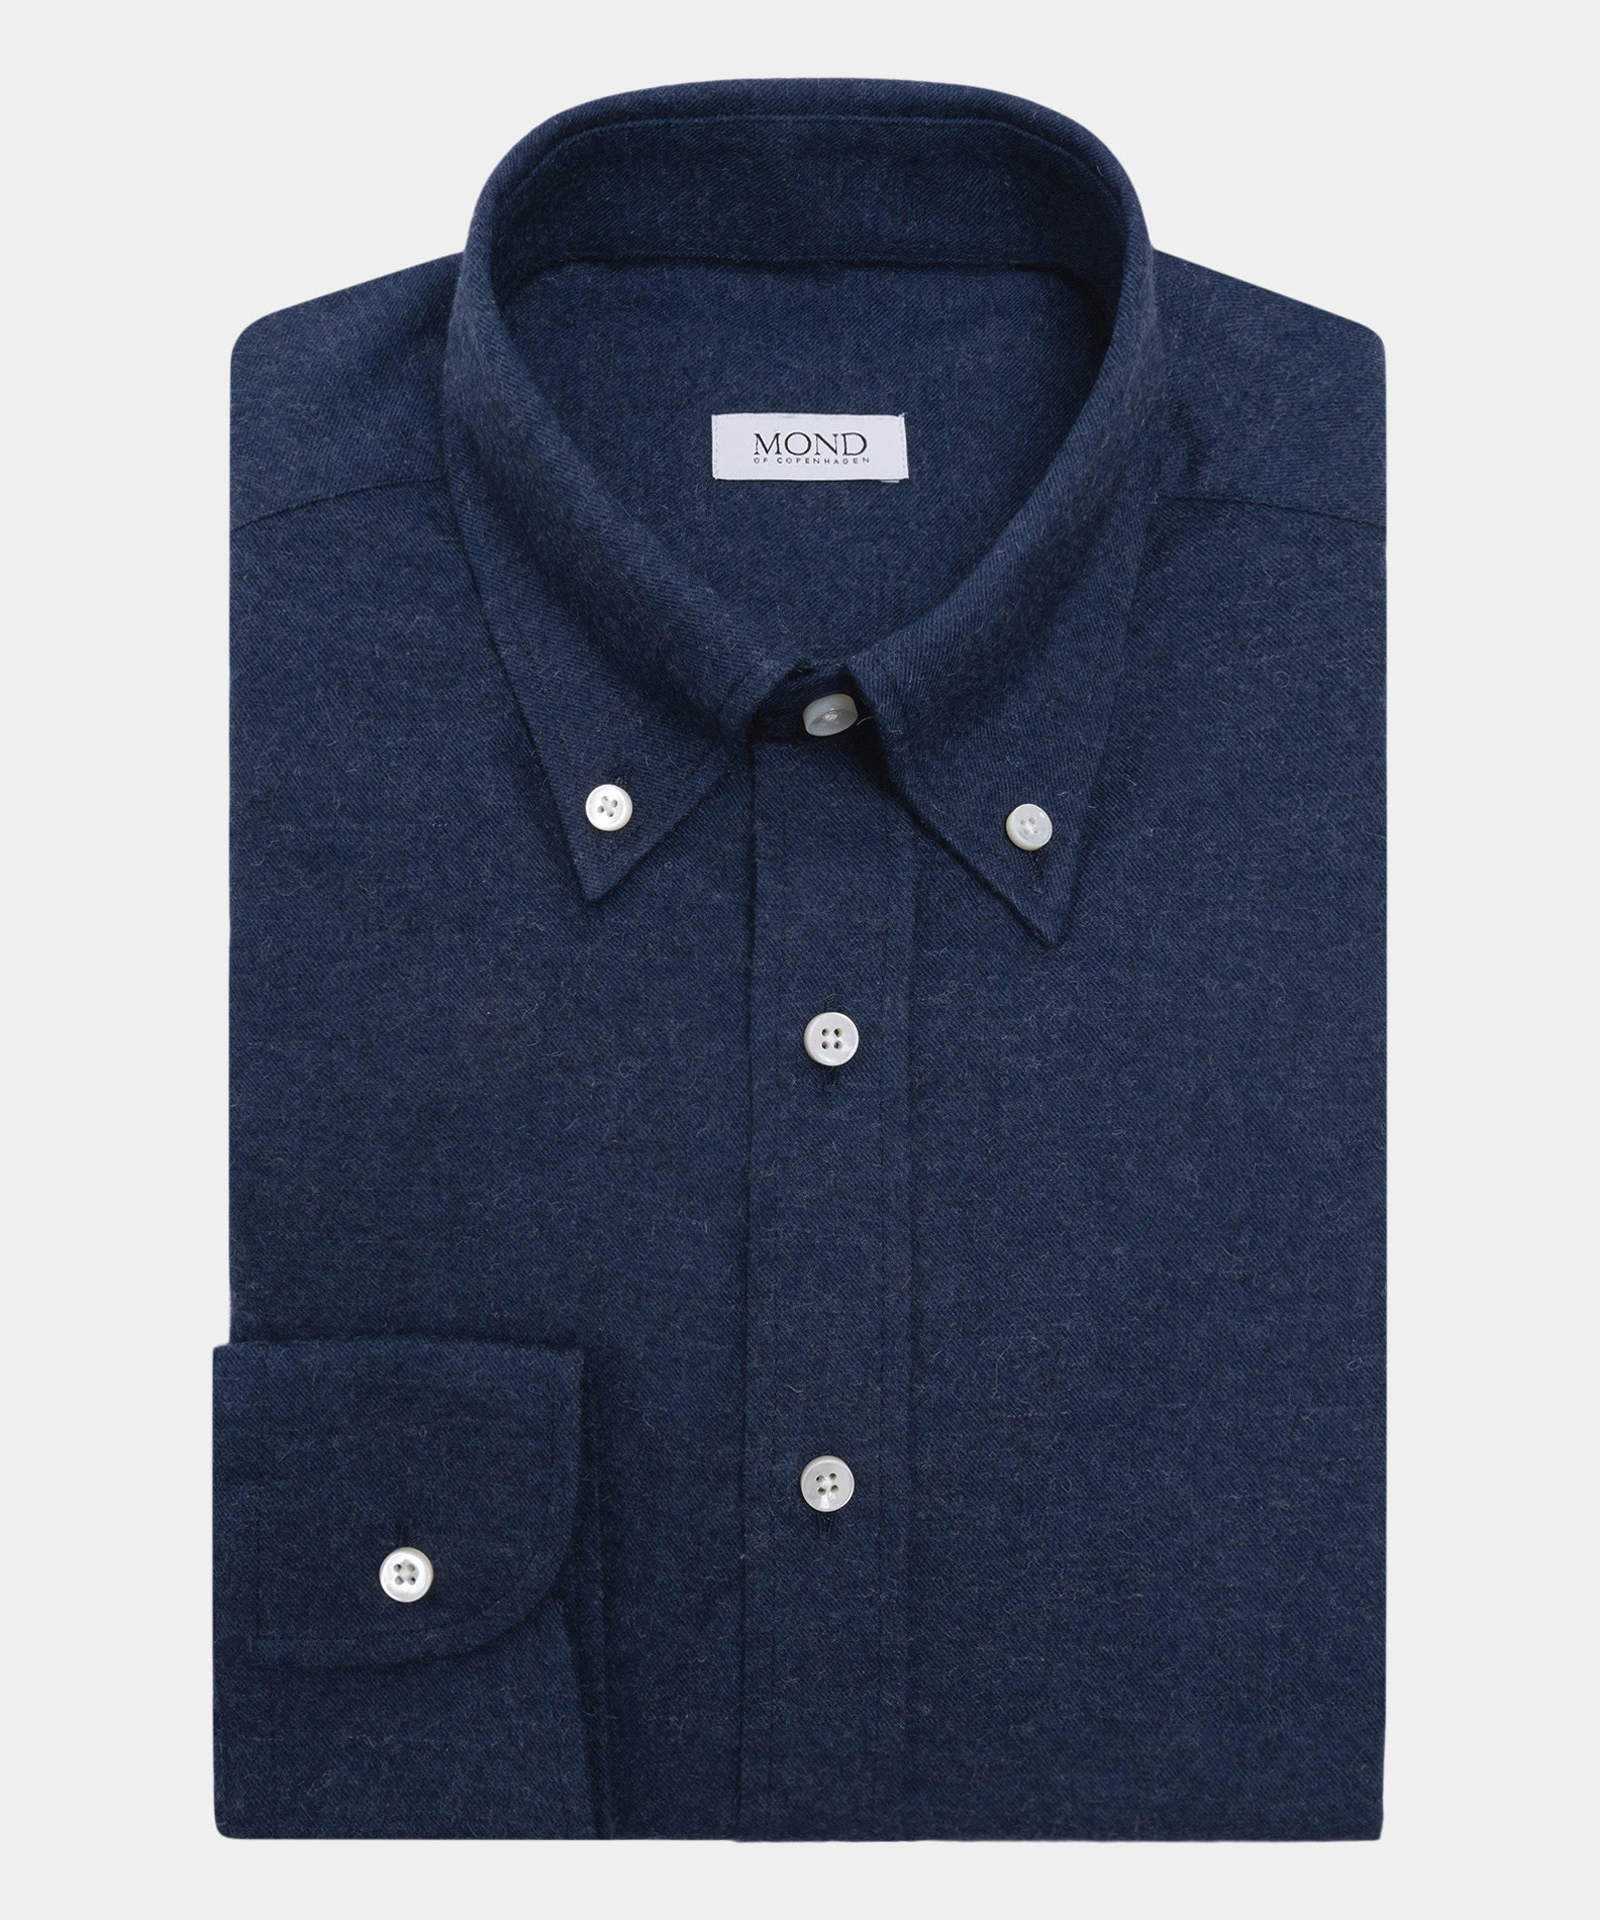 Navy shirt made of cotton and cashmere mix, custom made by mond of copenhagen